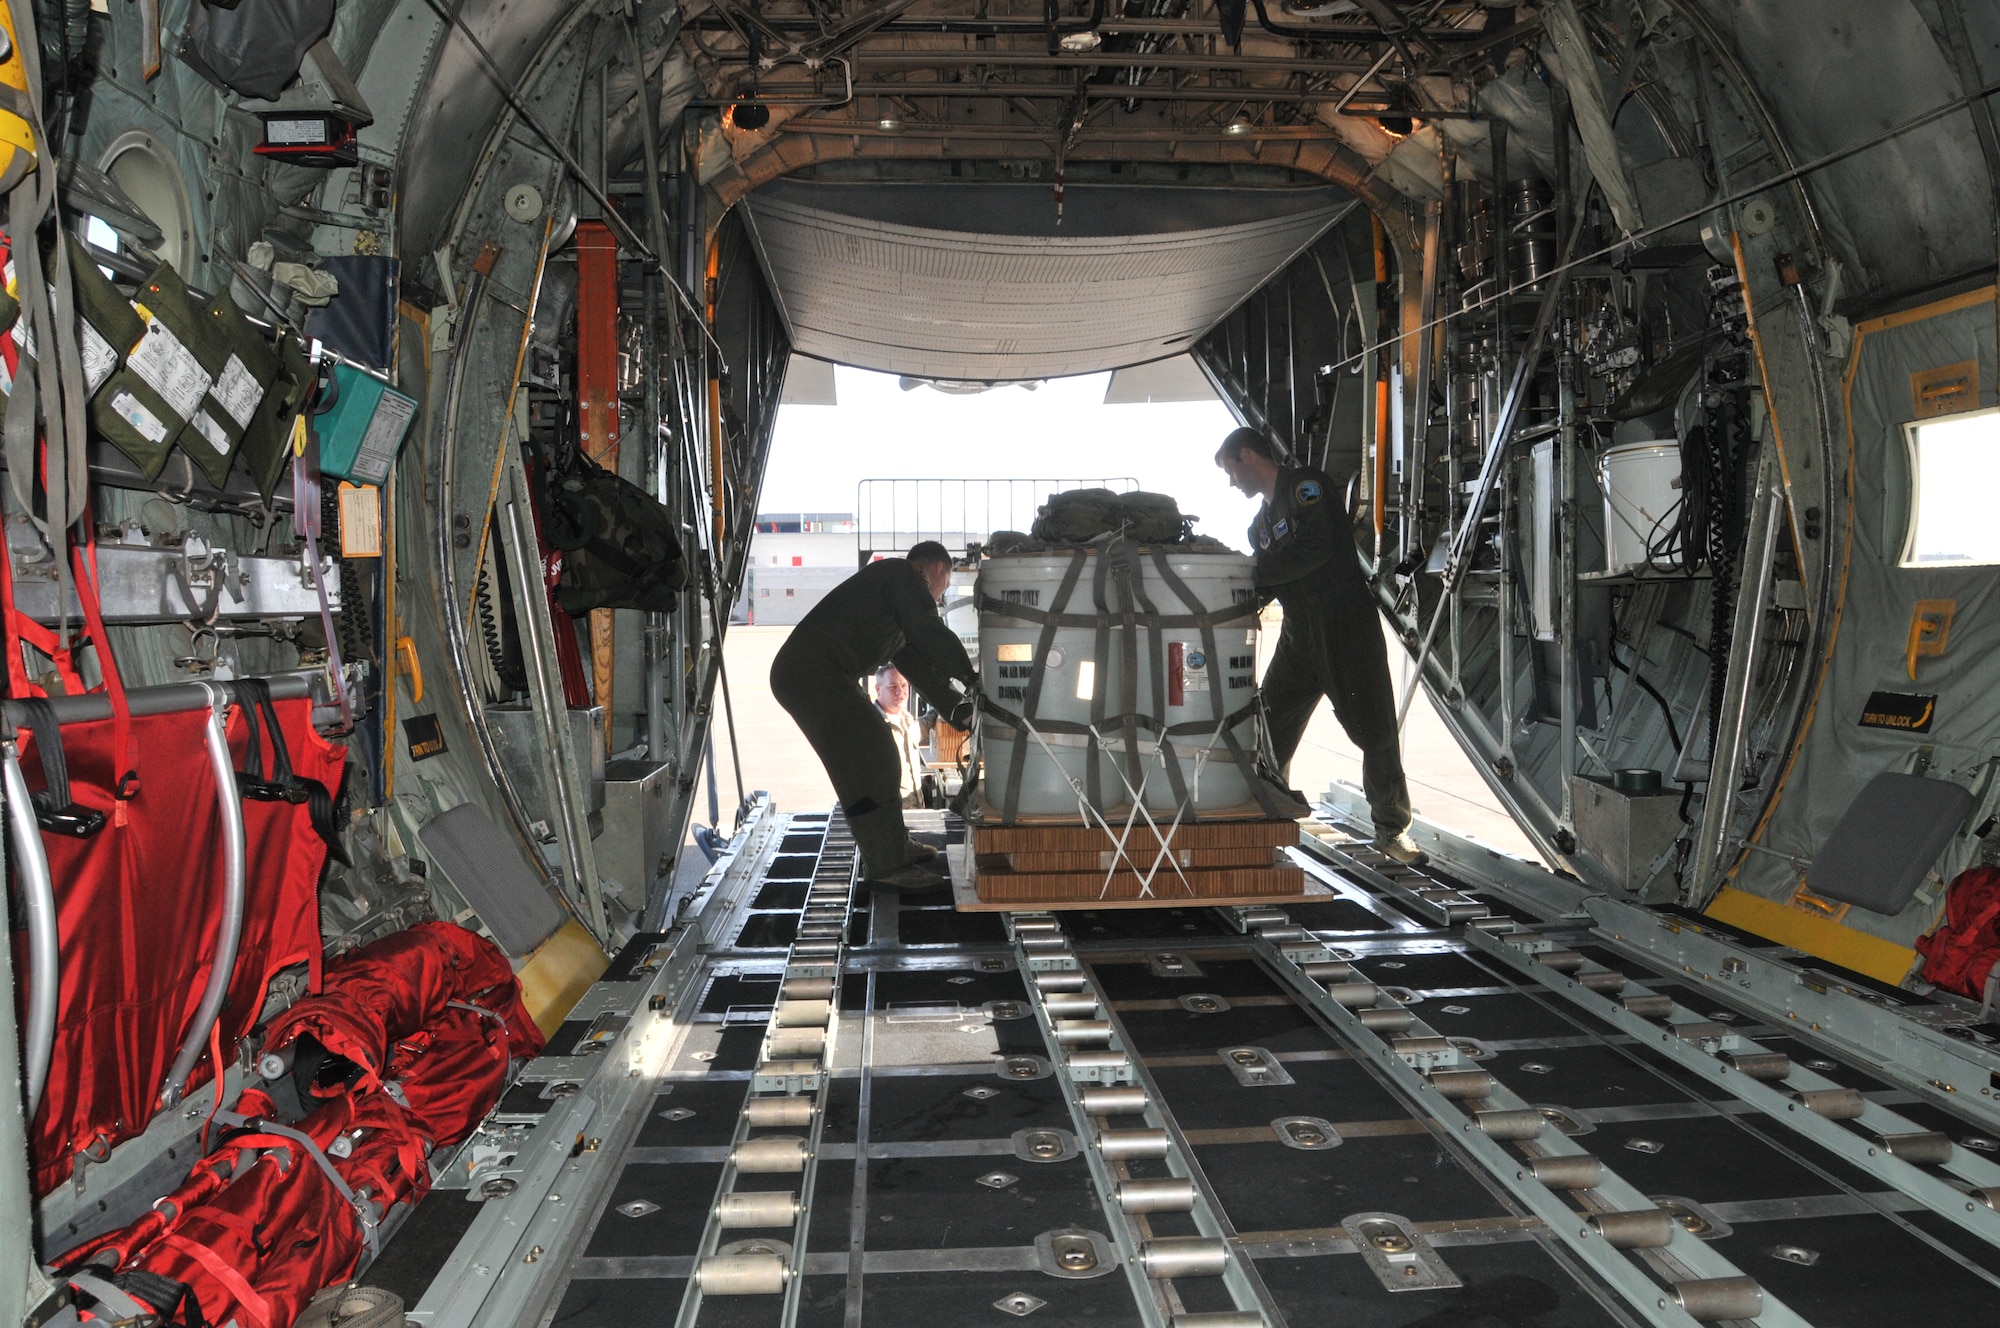 Loadmasters from the 186th Airlift Squadron secure a training cargo load aboard a Montana Air National Guard C-130 cargo aircraft. The cargo was intended to be dropped at the Chargin' Charlie Drop Zone at Malmstrom Air Force Base, Mont. March 5, 2016. Each load weighs nearly 1,000 pounds and was dropped from 1500 feet. (U.S. Air National Guard photo/Tech. Sgt. Michael
Touchette)

